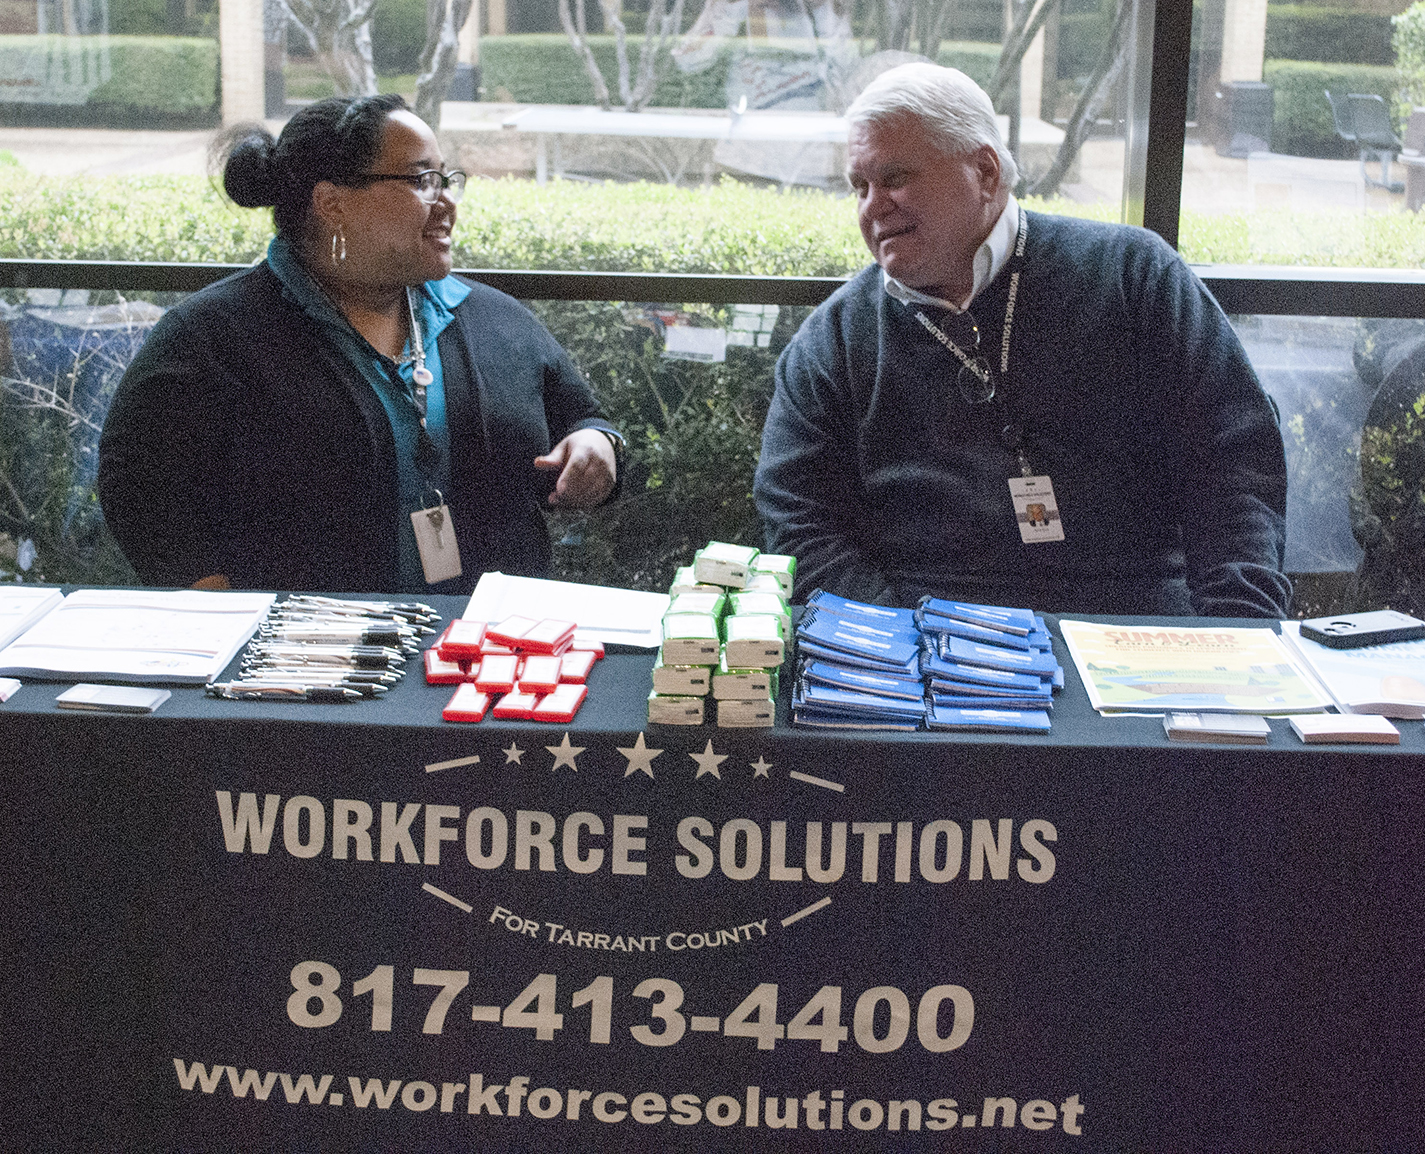 Tarrant County Workforce Solutions recruiters Meredyth Kelly and Jerry Krus discuss students as prospective employees at the districtwide job fair March 28 on NE Campus.